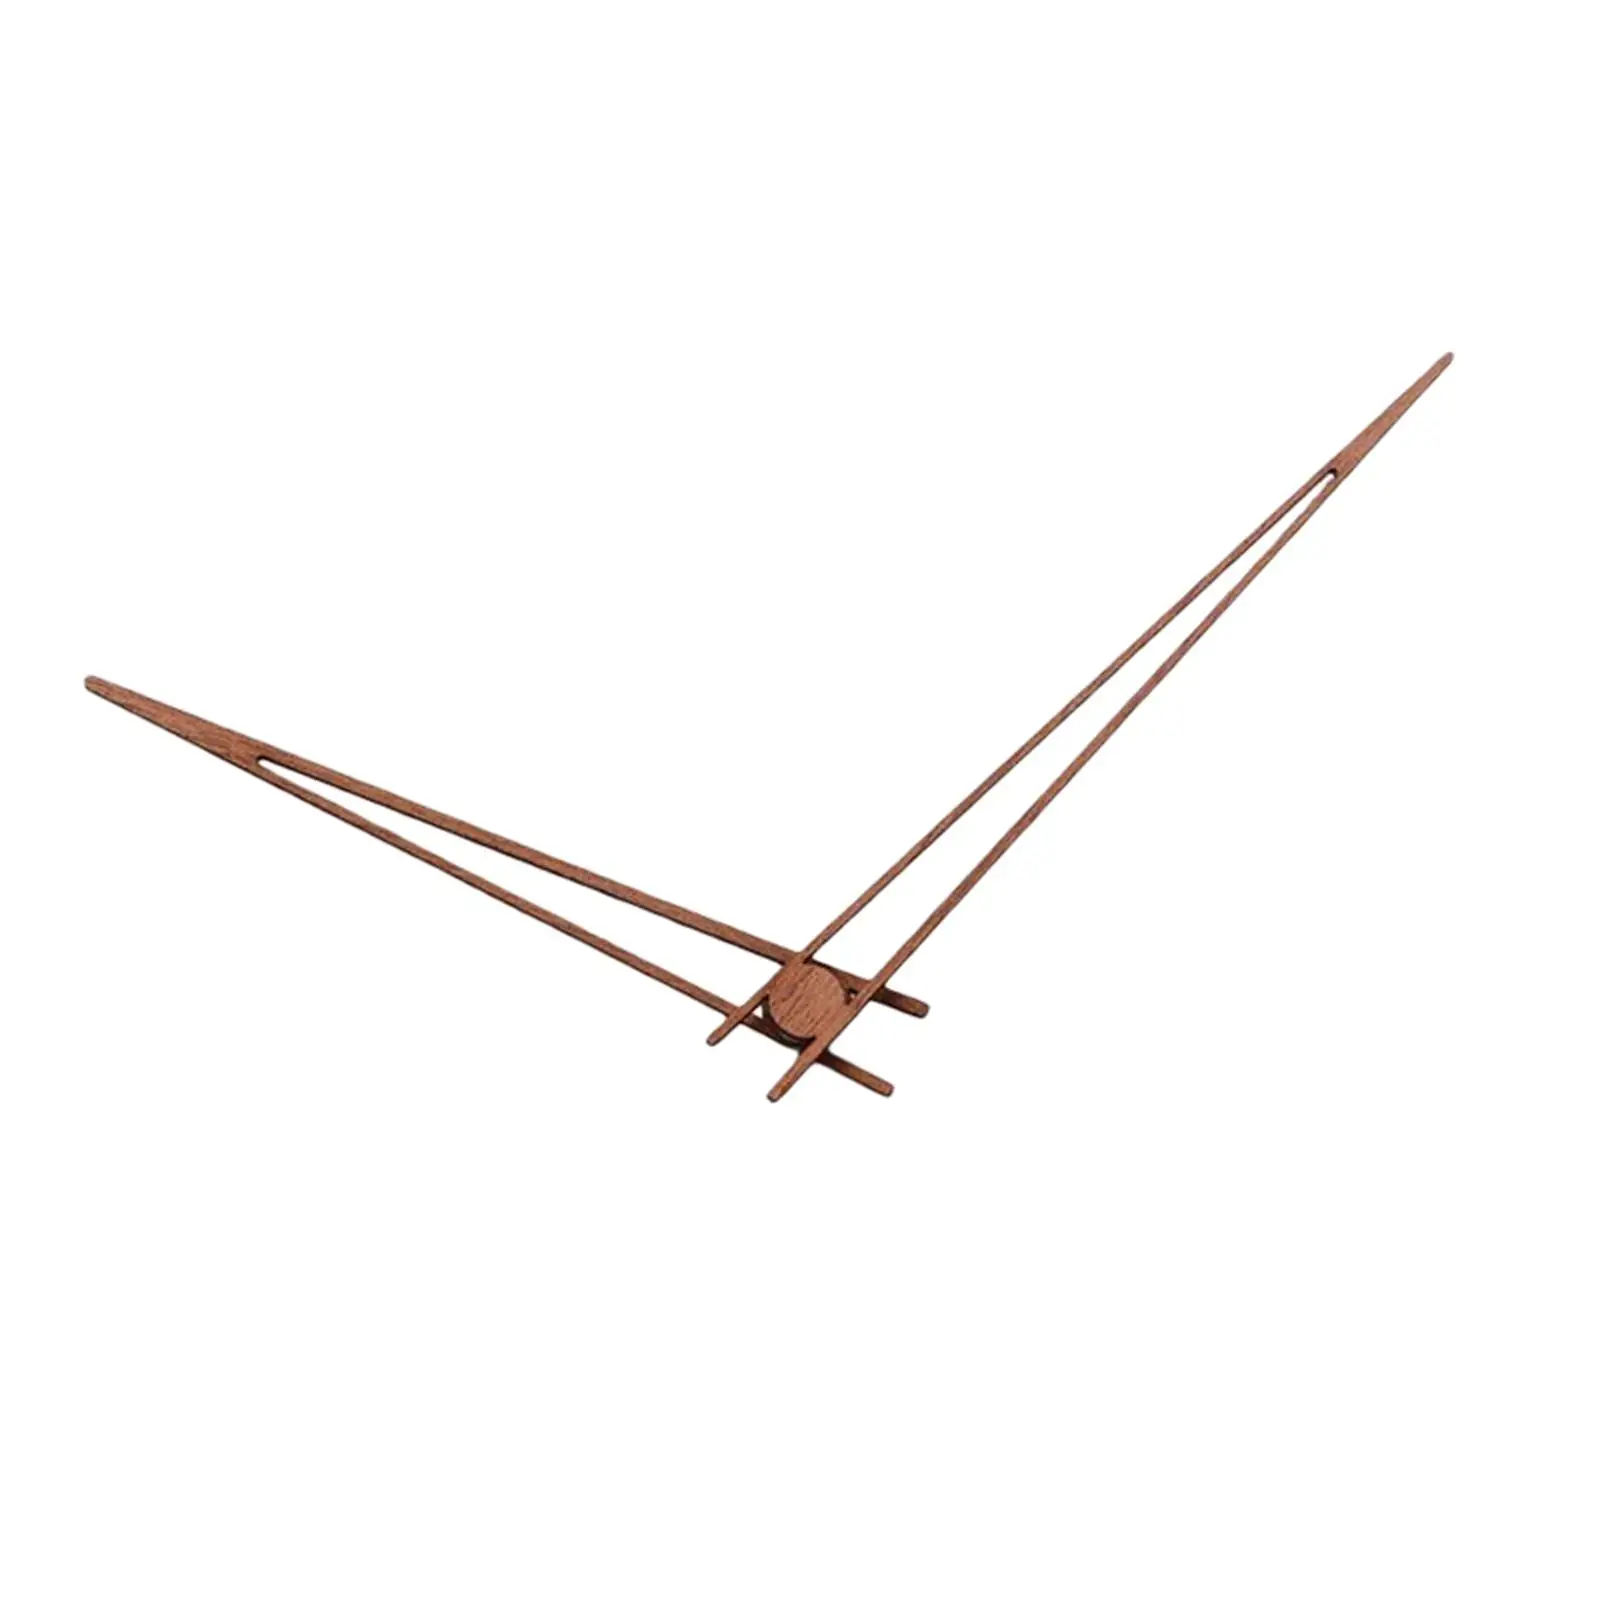 Walnut wall Clock Hands Silient Mechanism Parts Clock Pointers for Replace Part DIY Wall Clock Repair Parts Tools Accessory